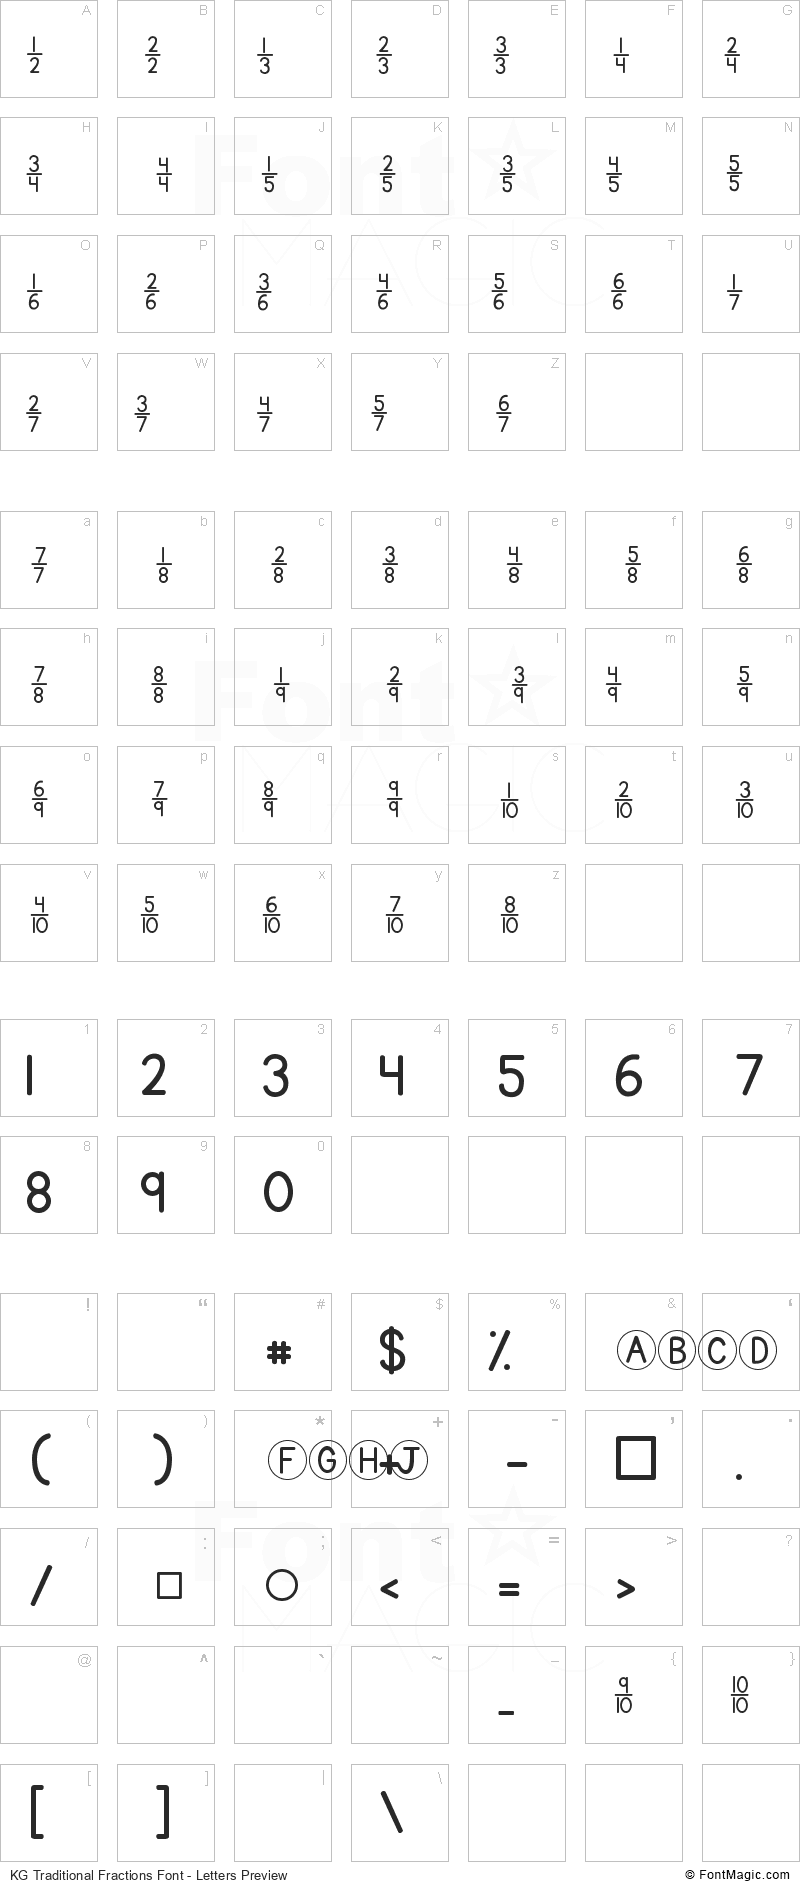 KG Traditional Fractions Font - All Latters Preview Chart